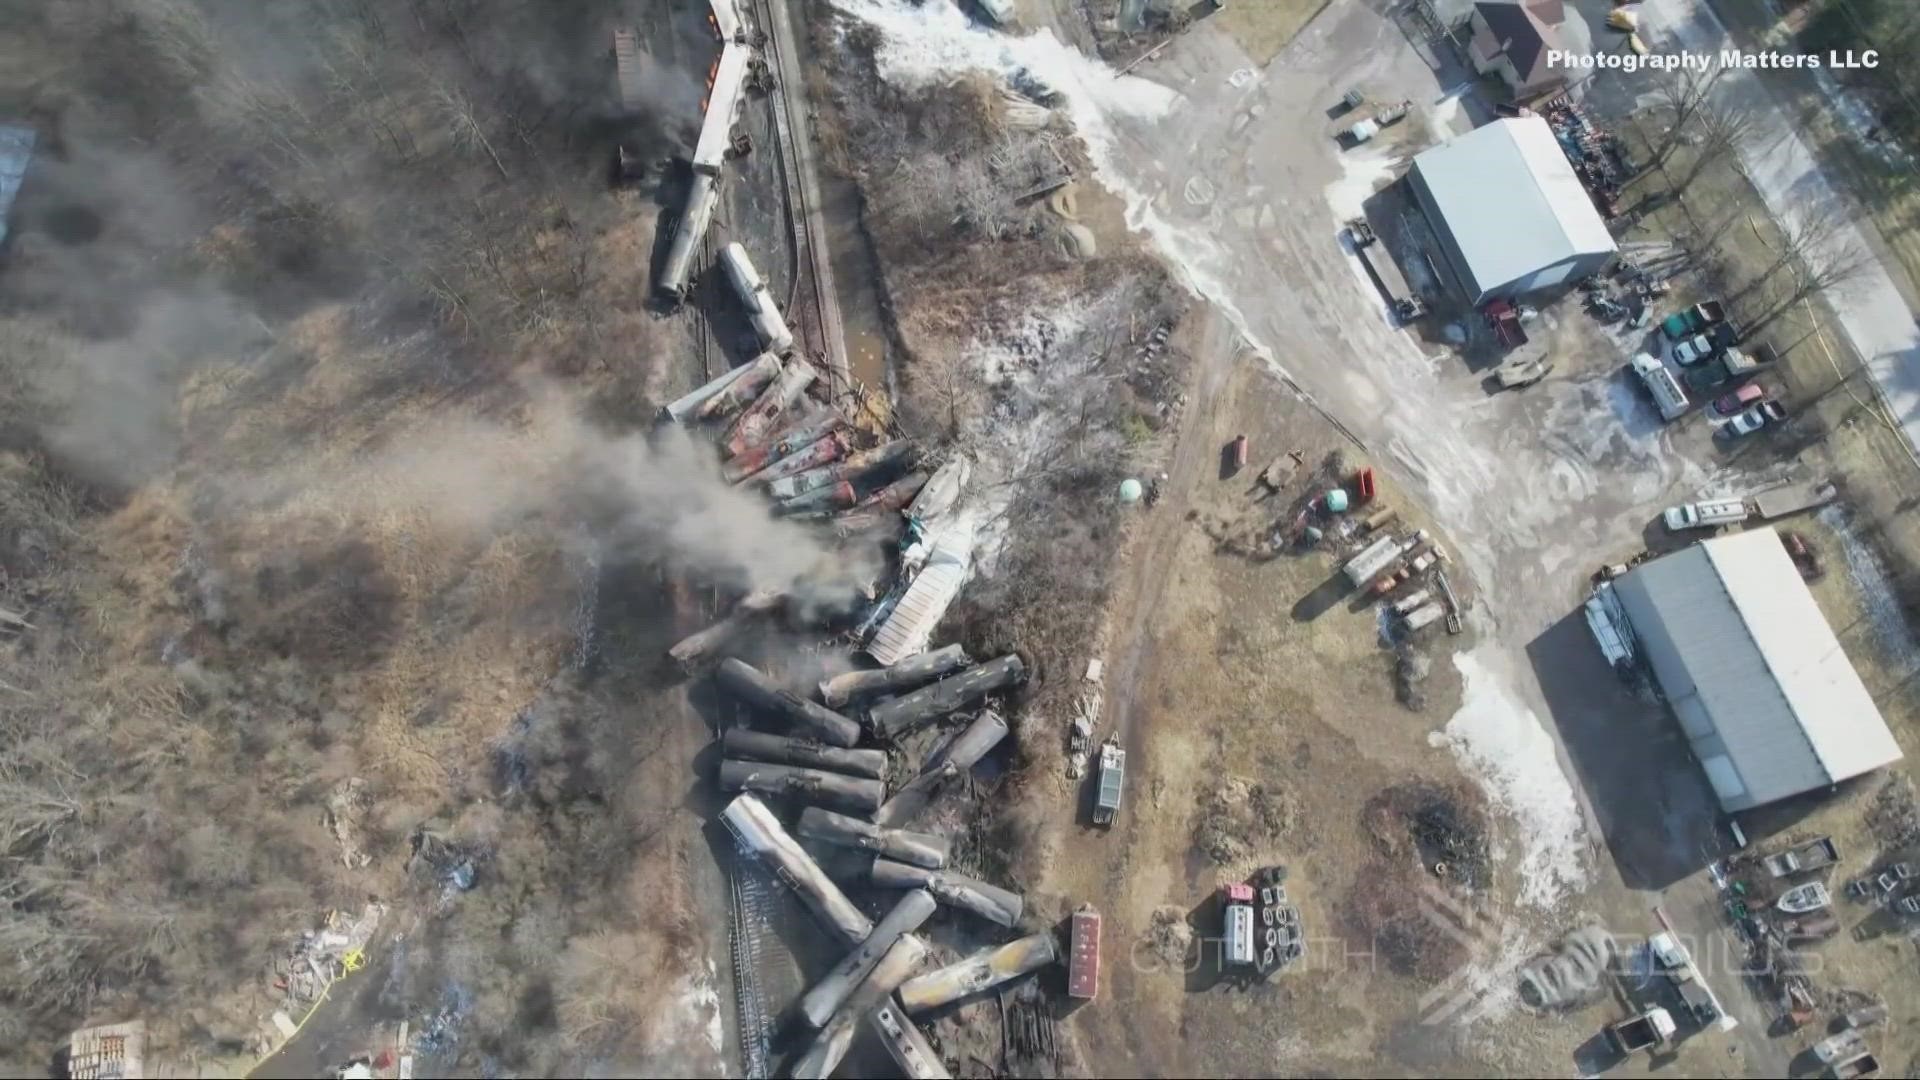 An urgent evacuation order was issued Sunday evening as crews continue work at a train derailment in Columbiana County.